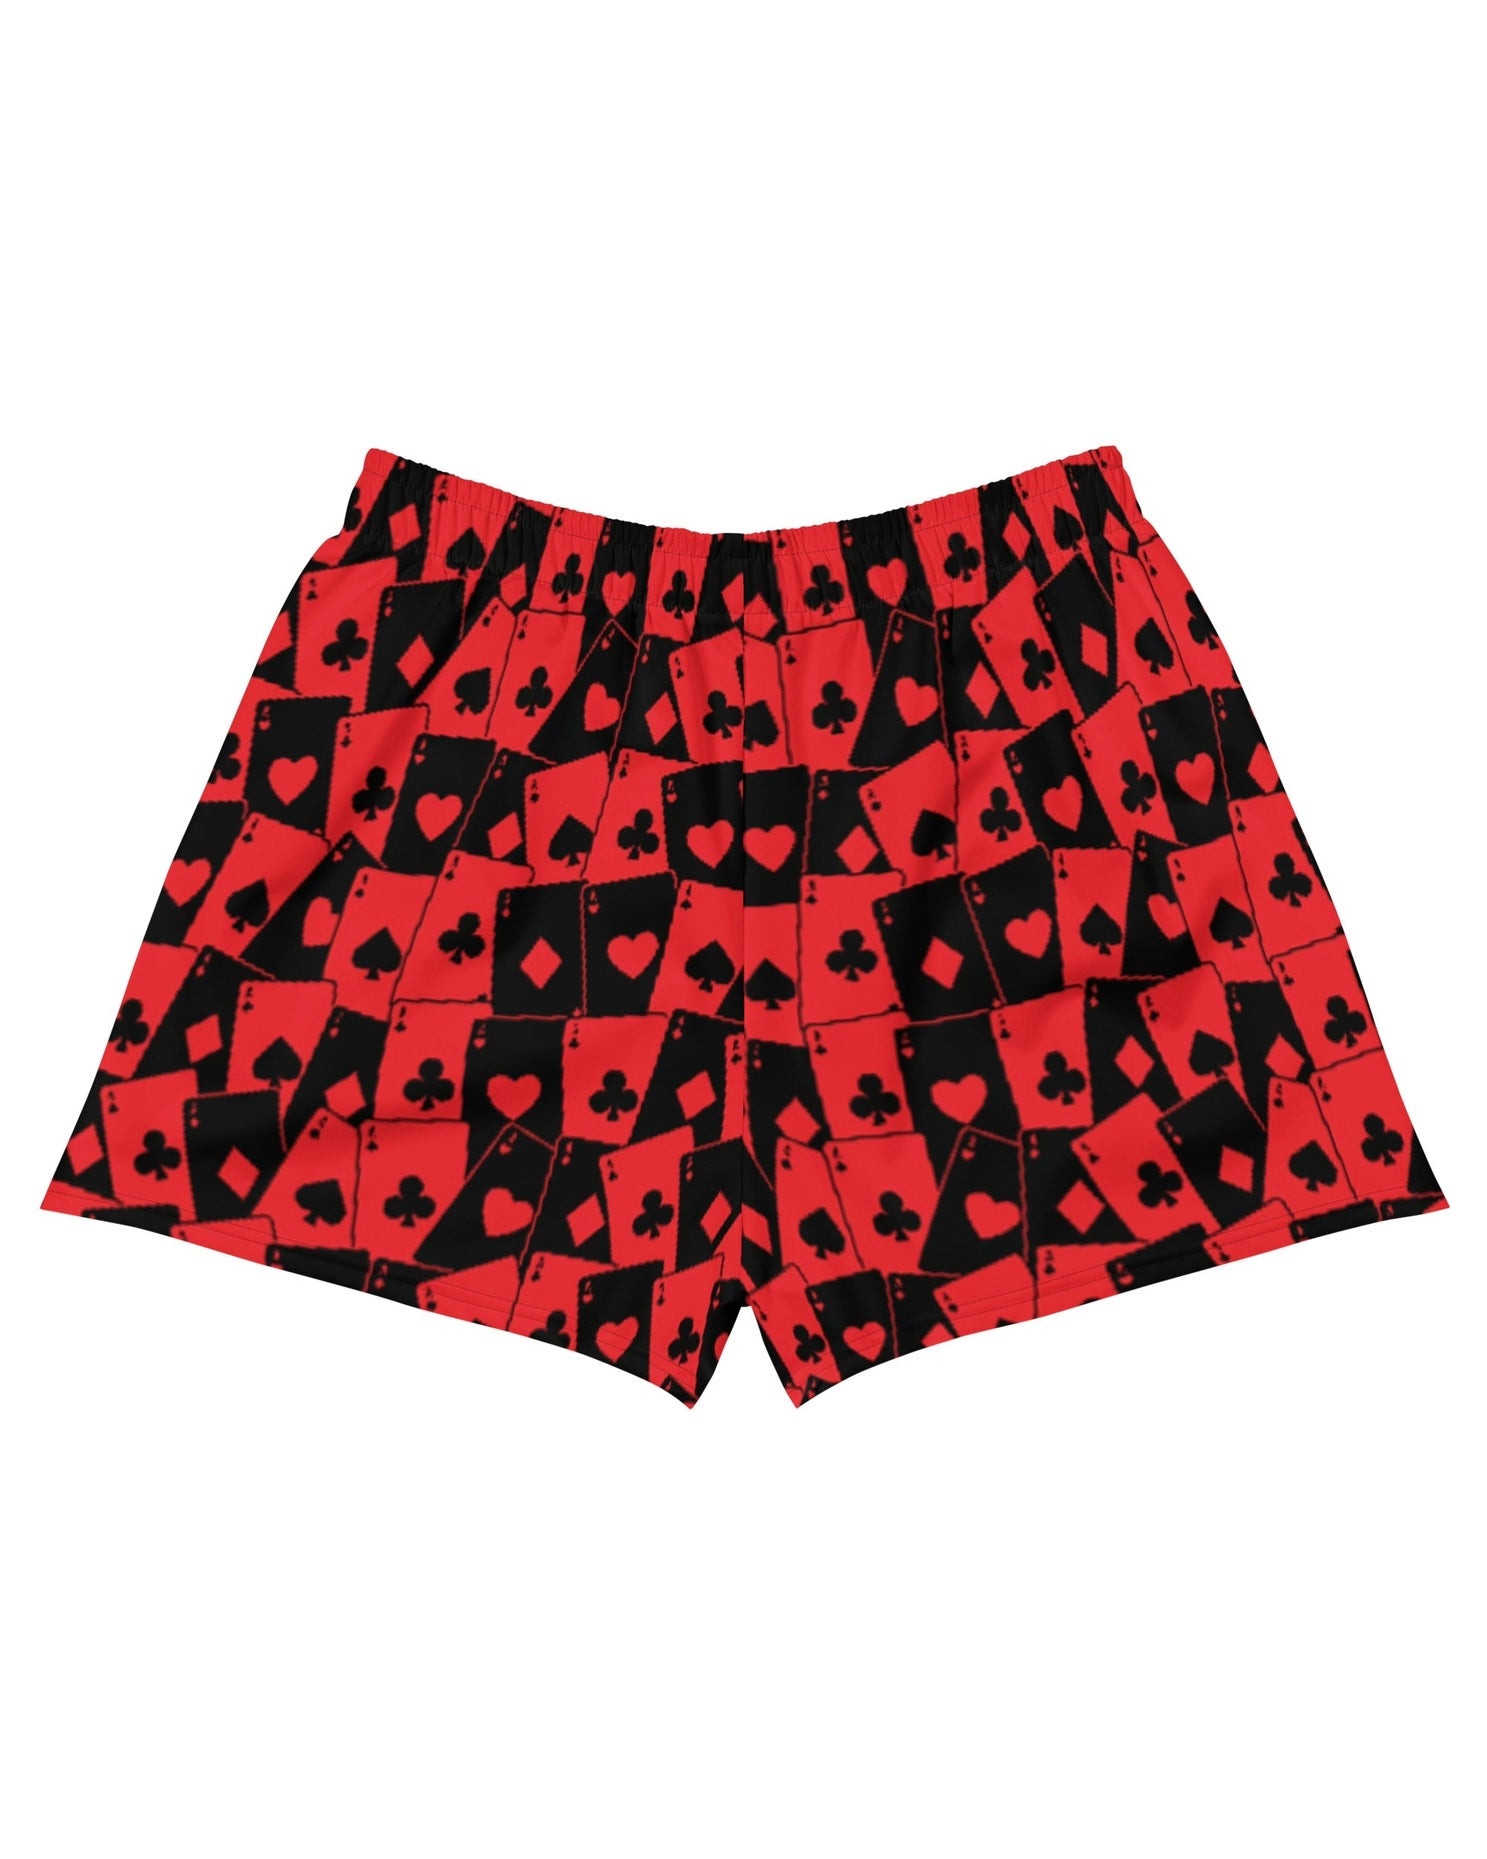 Ace Of Hearts Shorts, Athletic Shorts, - One Stop Rave